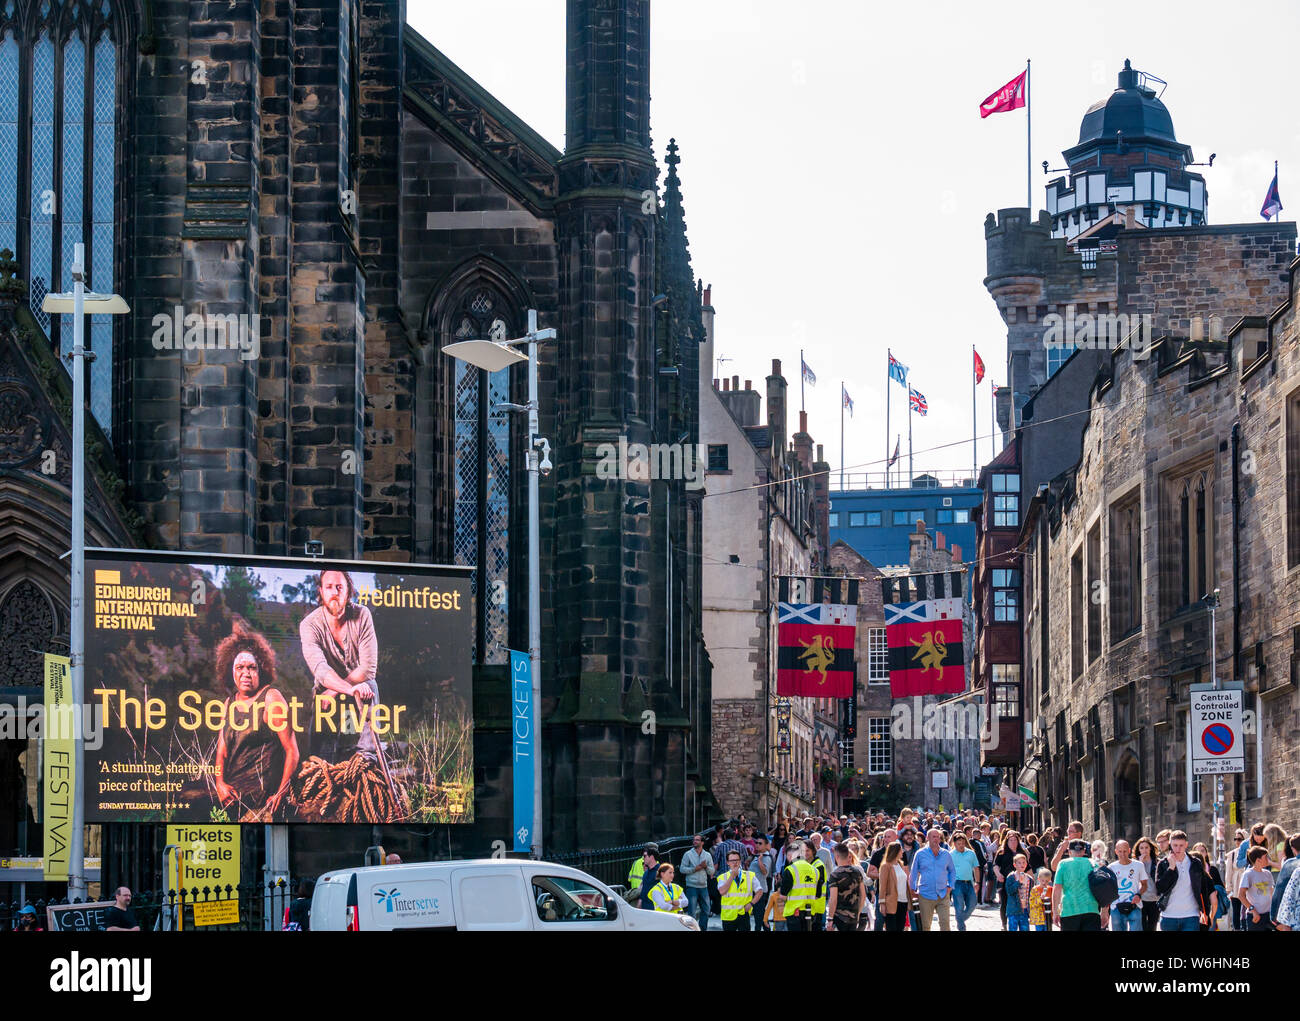 Royal Mile, Edinburgh, Scotland, United Kingdom, 1 August 2019. On the day before the official opening of the Fringe festival, the centre of the city along its main tourist route is already heaving with visitors. The headquarters of the Edinburgh International Festival, The Hub on Castlehill with a large poster advertising a drama play called The Secret River Stock Photo